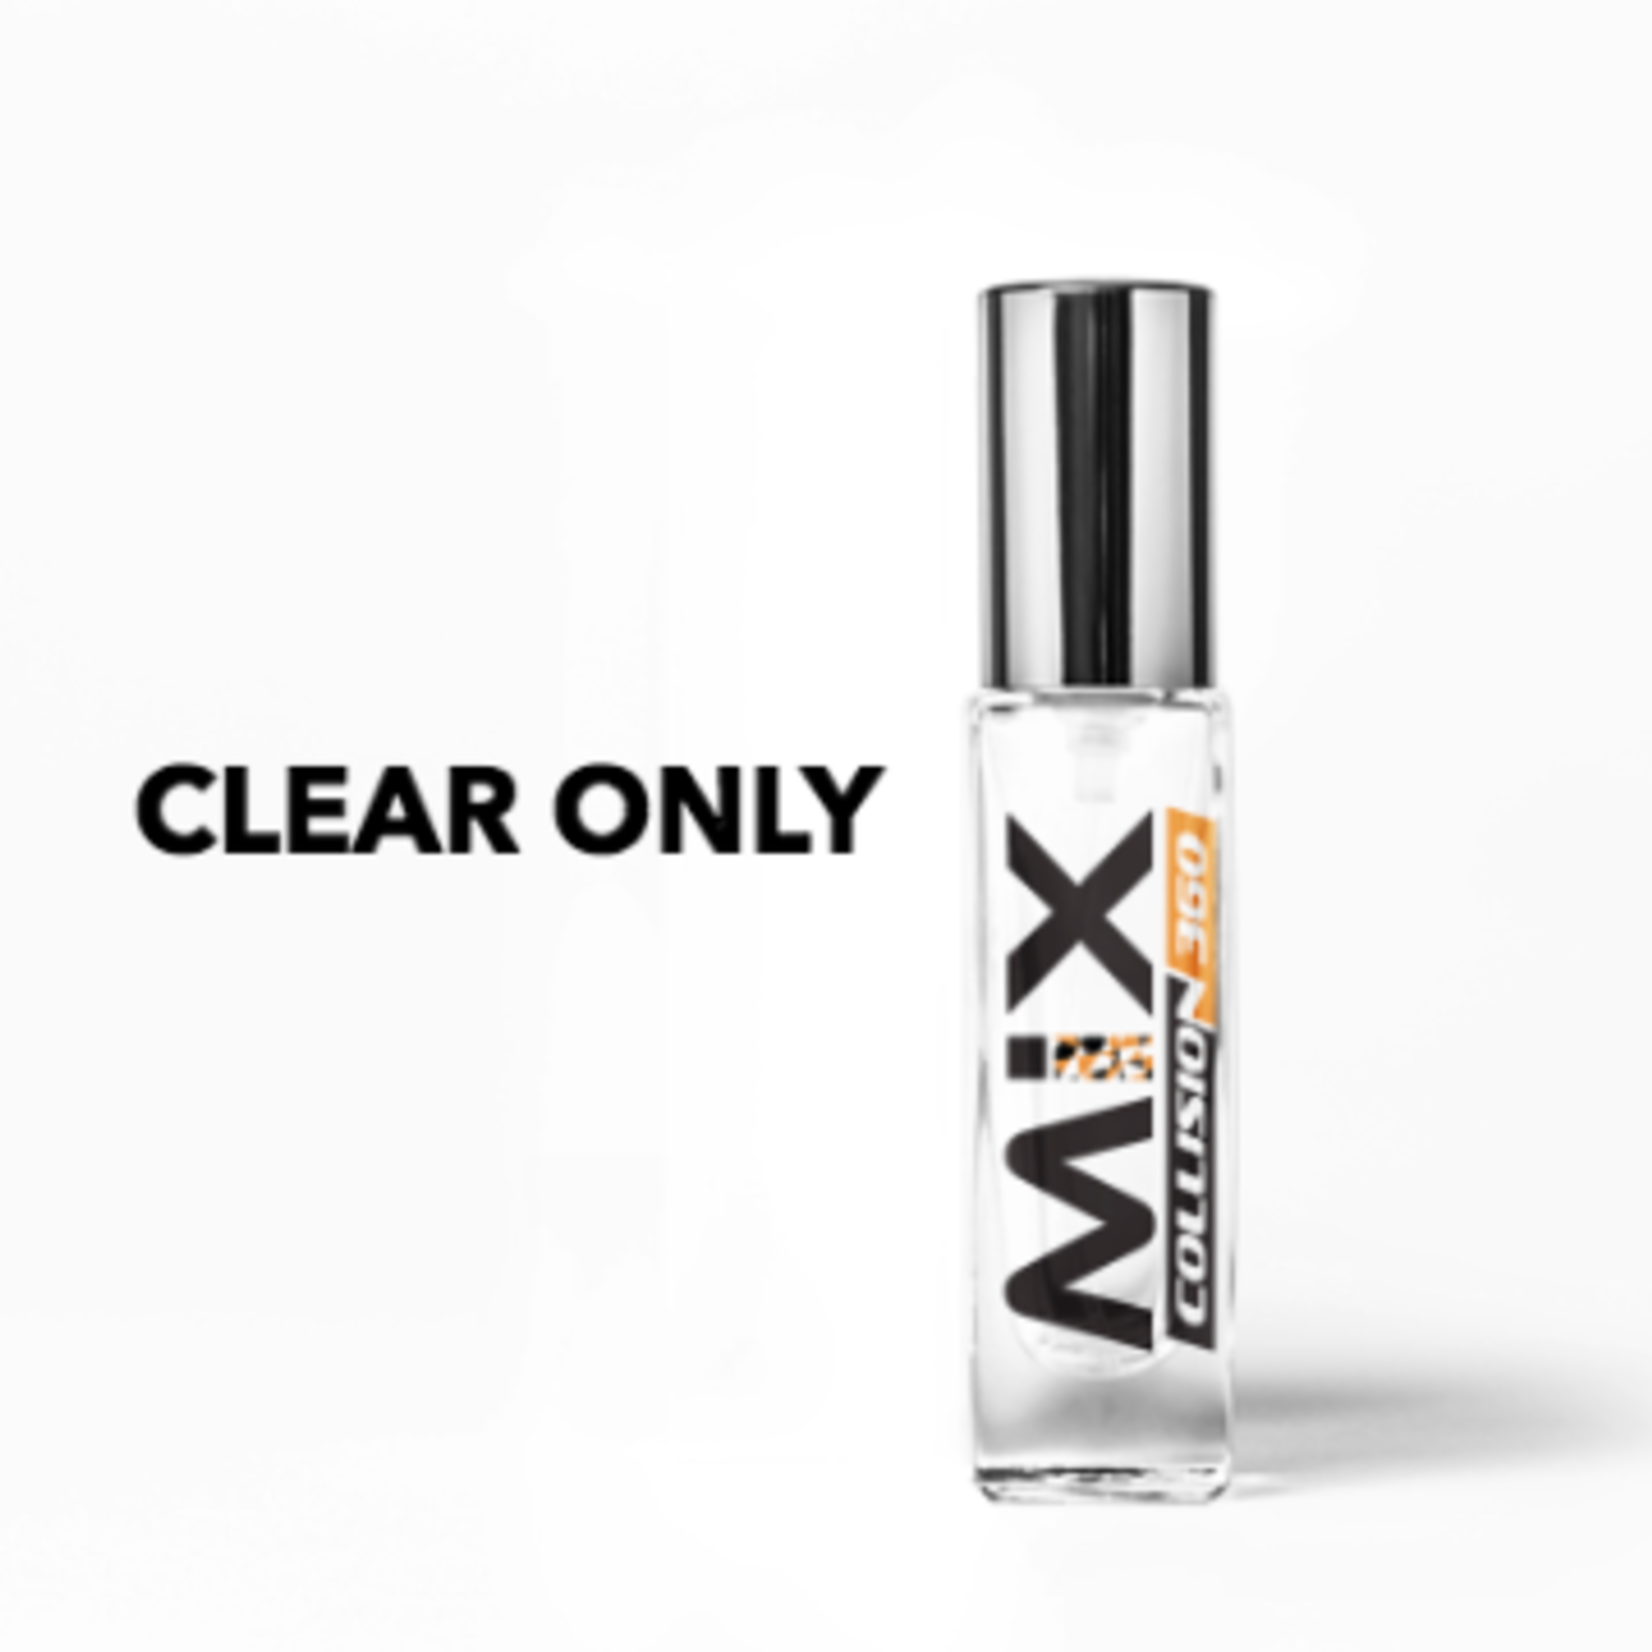 360 360 Mix Touch Up Clear, Bottle